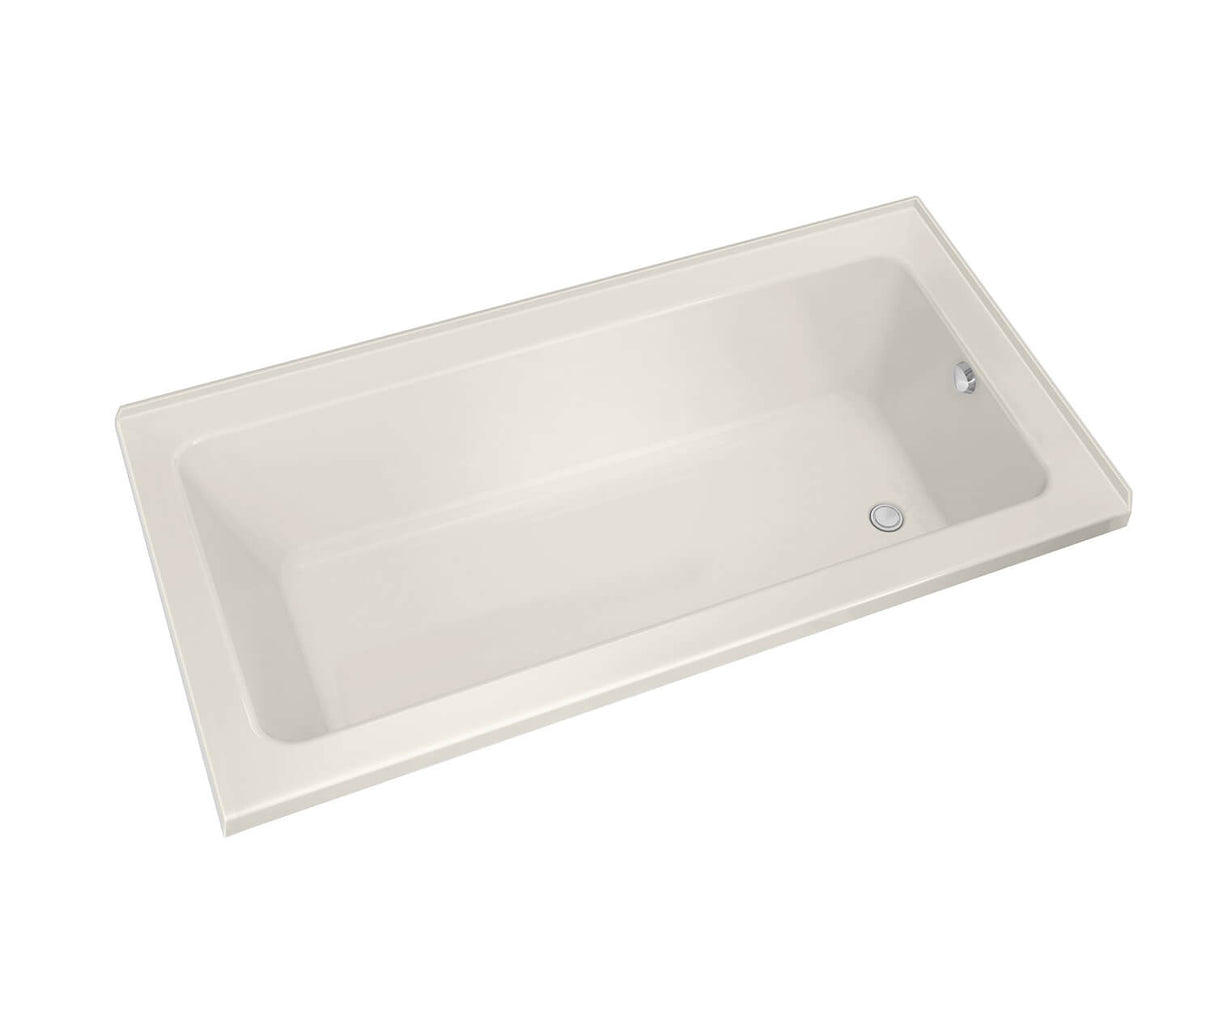 MAAX 106209-R-097-007 Pose 6636 IF Acrylic Corner Right Right-Hand Drain Combined Whirlpool & Aeroeffect Bathtub in Biscuit